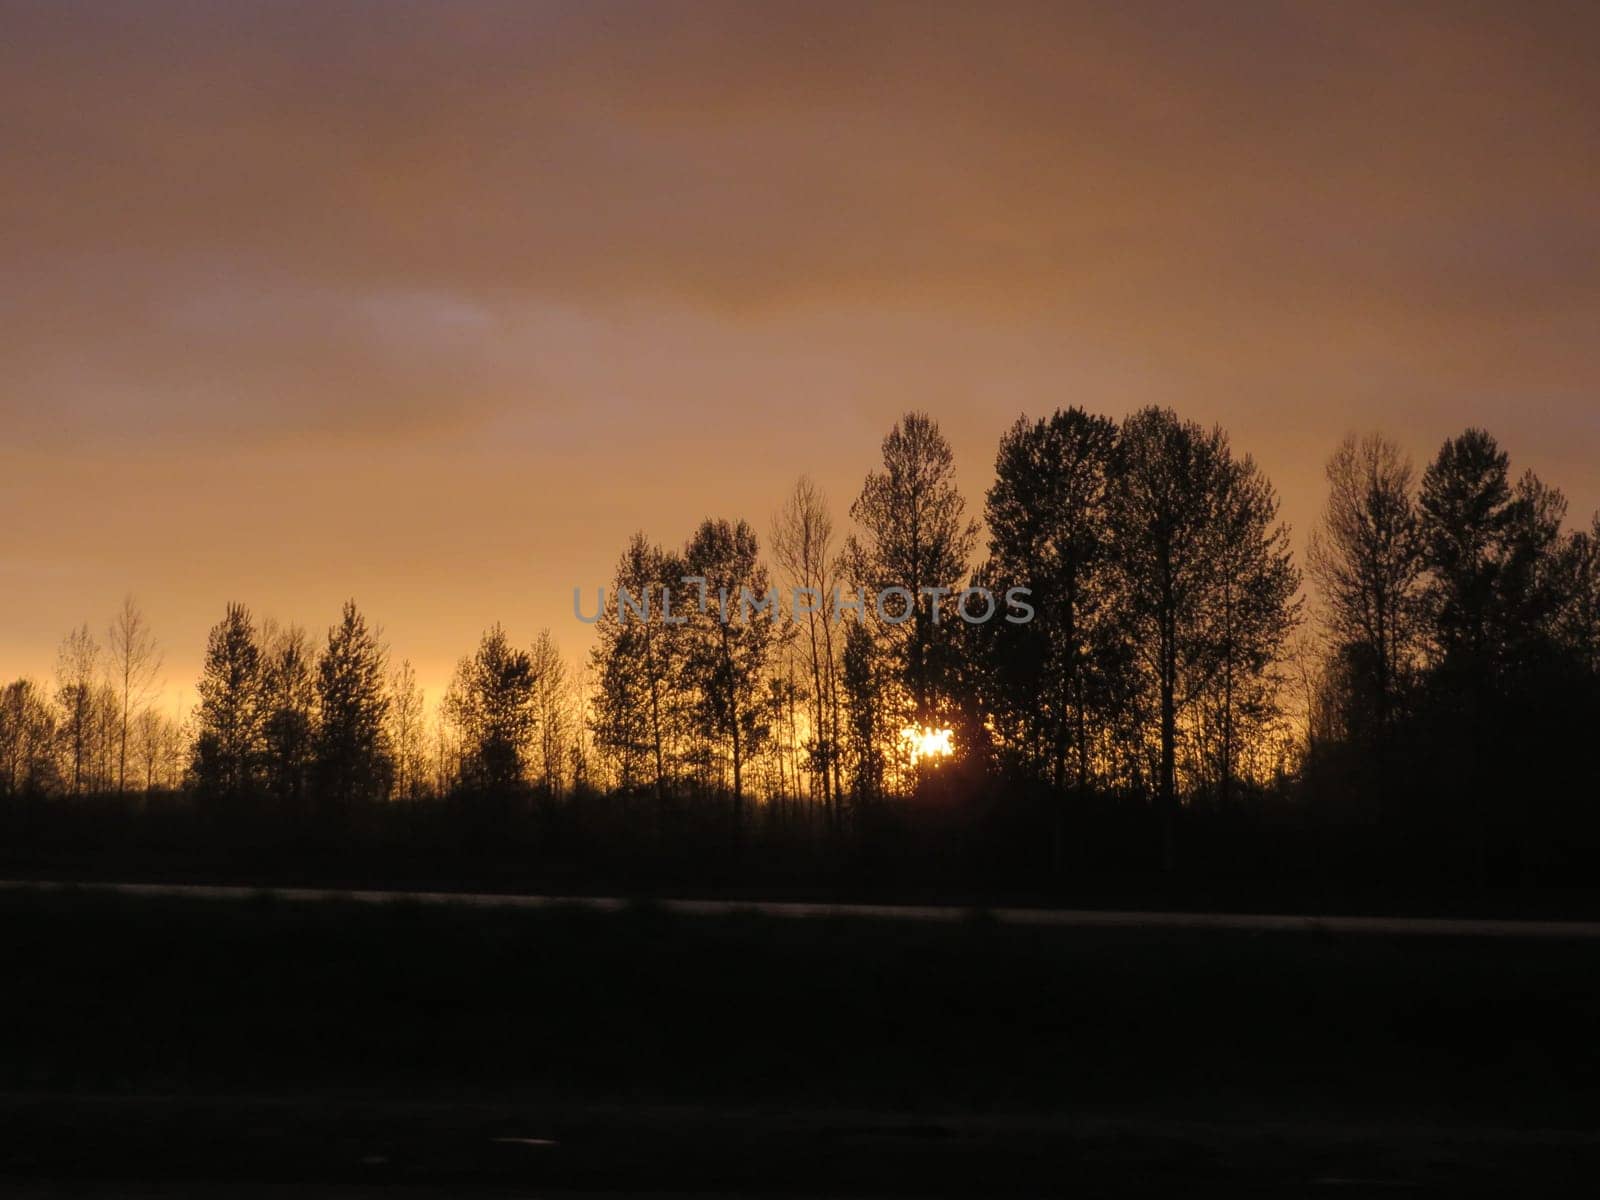 Fading Sunset along Oregon Freeway with Silhouette of Trees. High quality photo